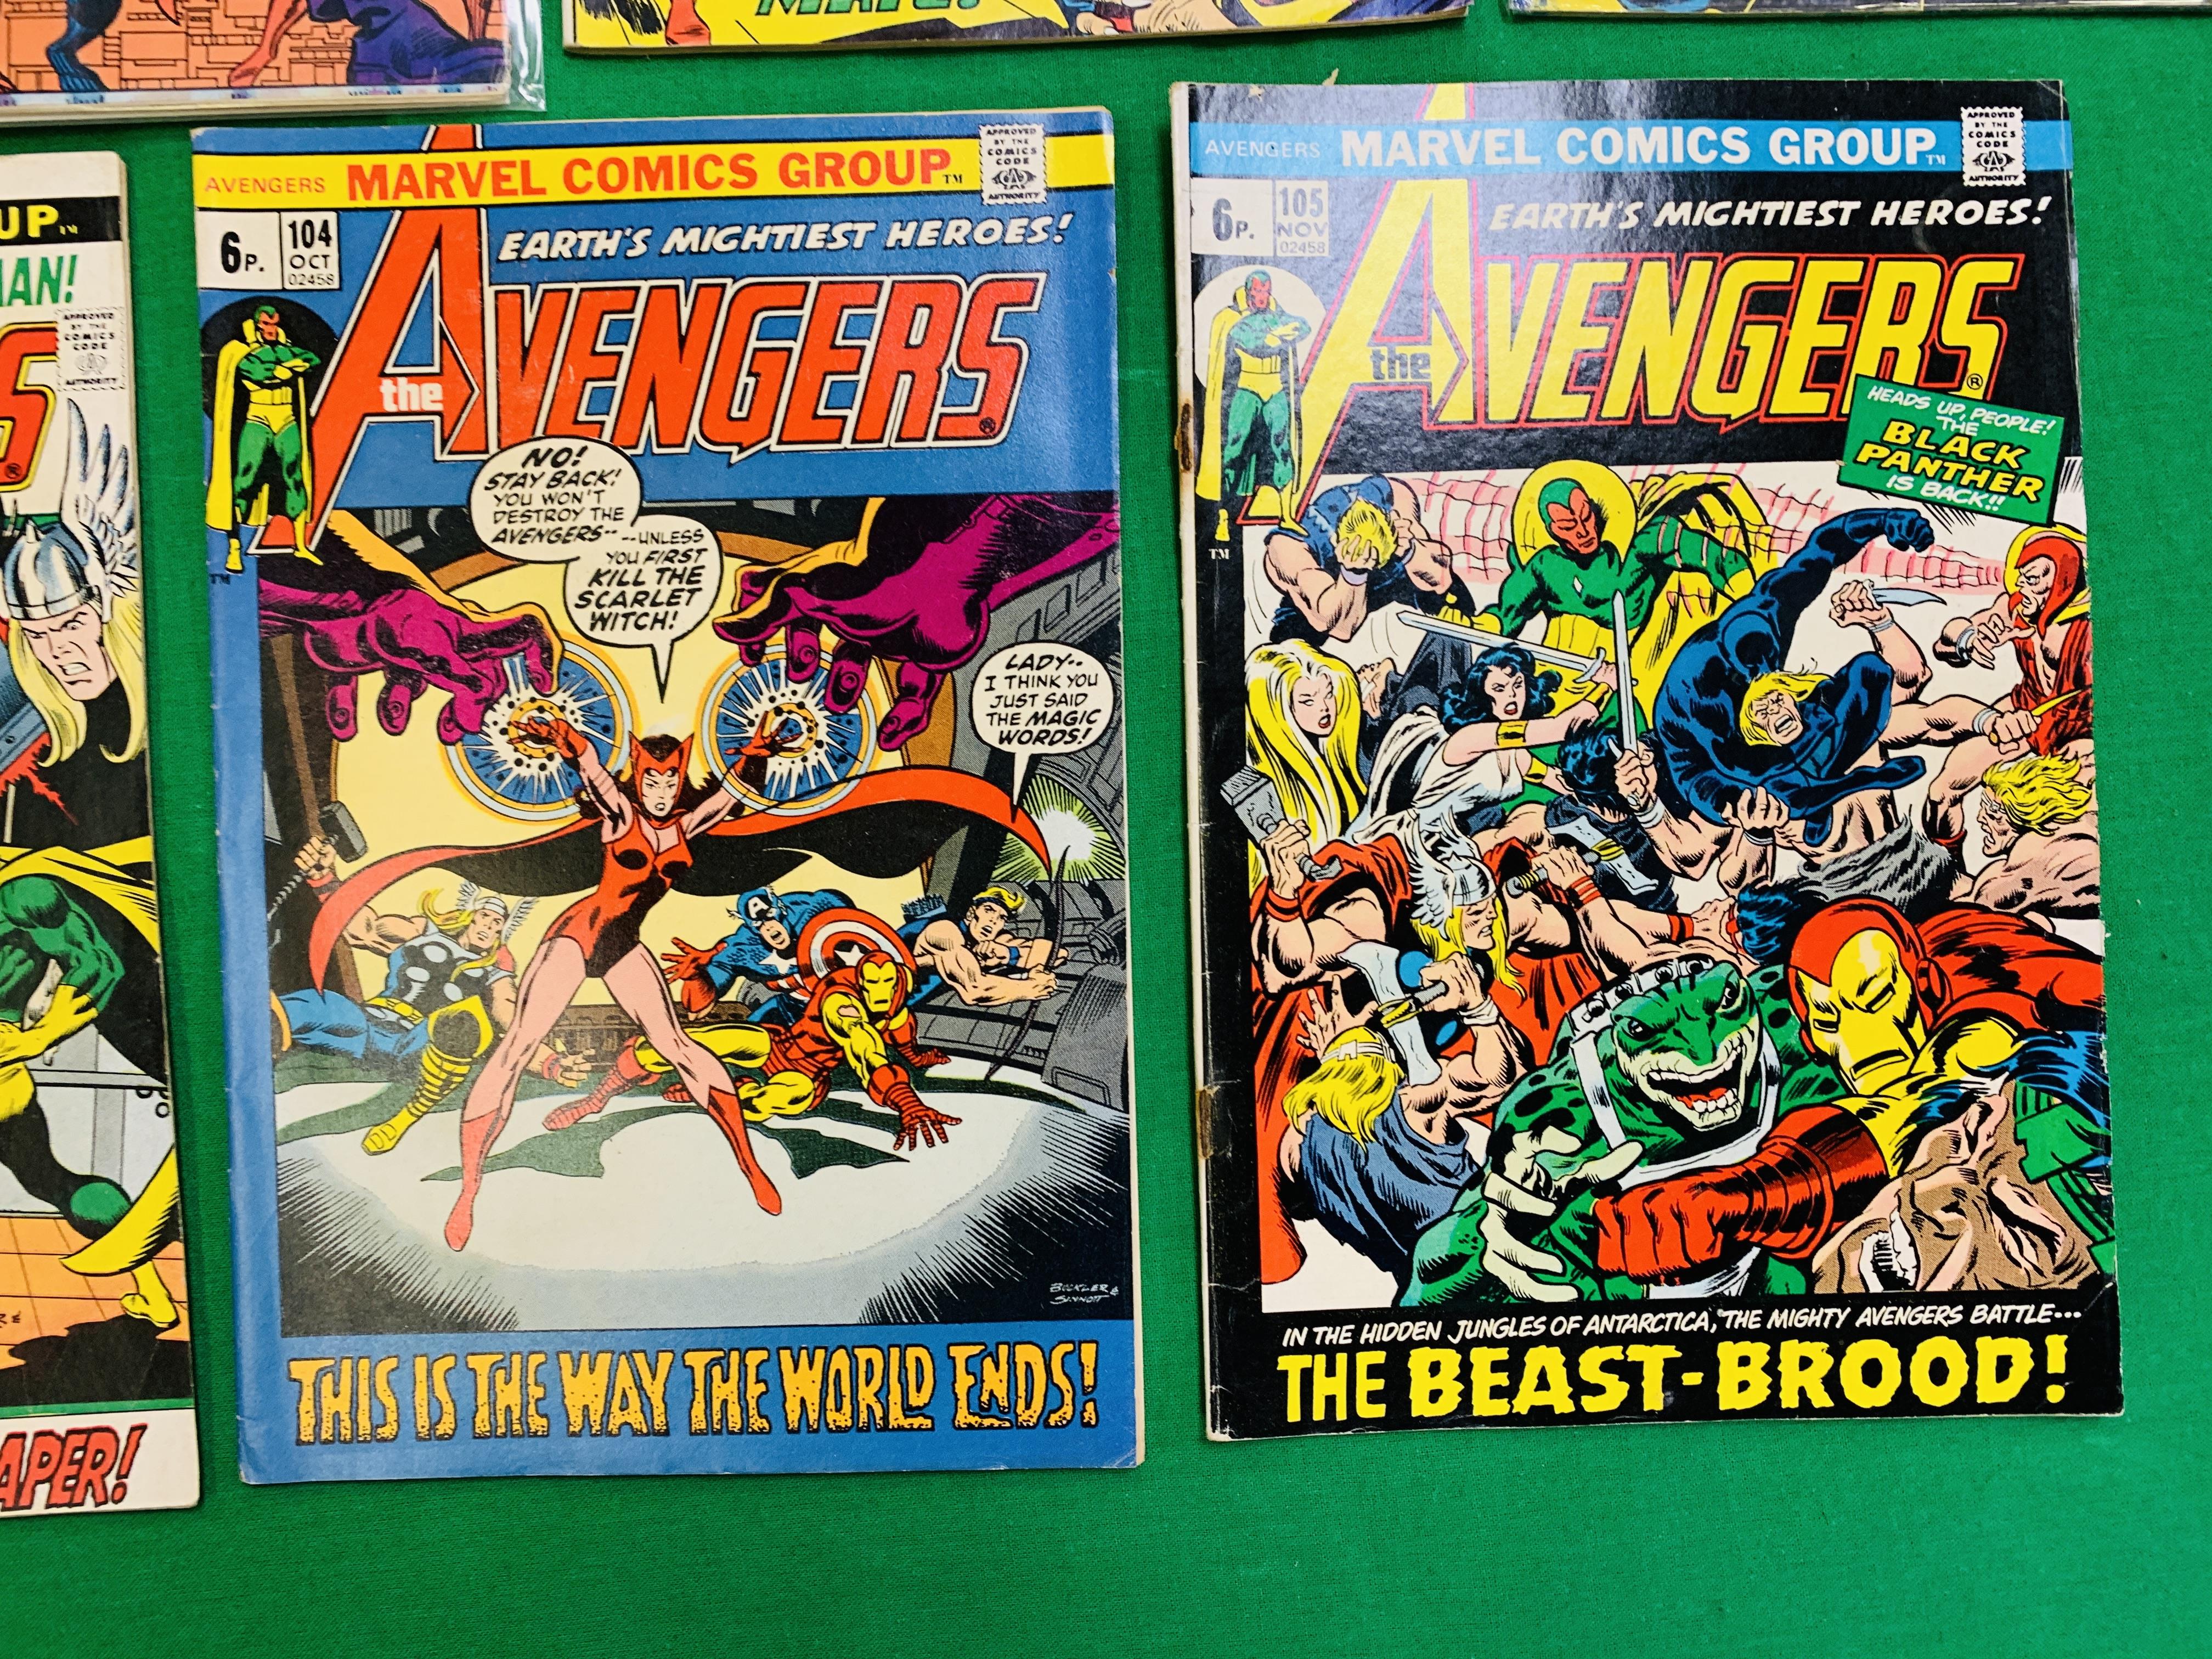 MARVEL COMICS THE AVENGERS NO. 101 - 299, MISSING ISSUES 103 AND 110. - Image 3 of 130